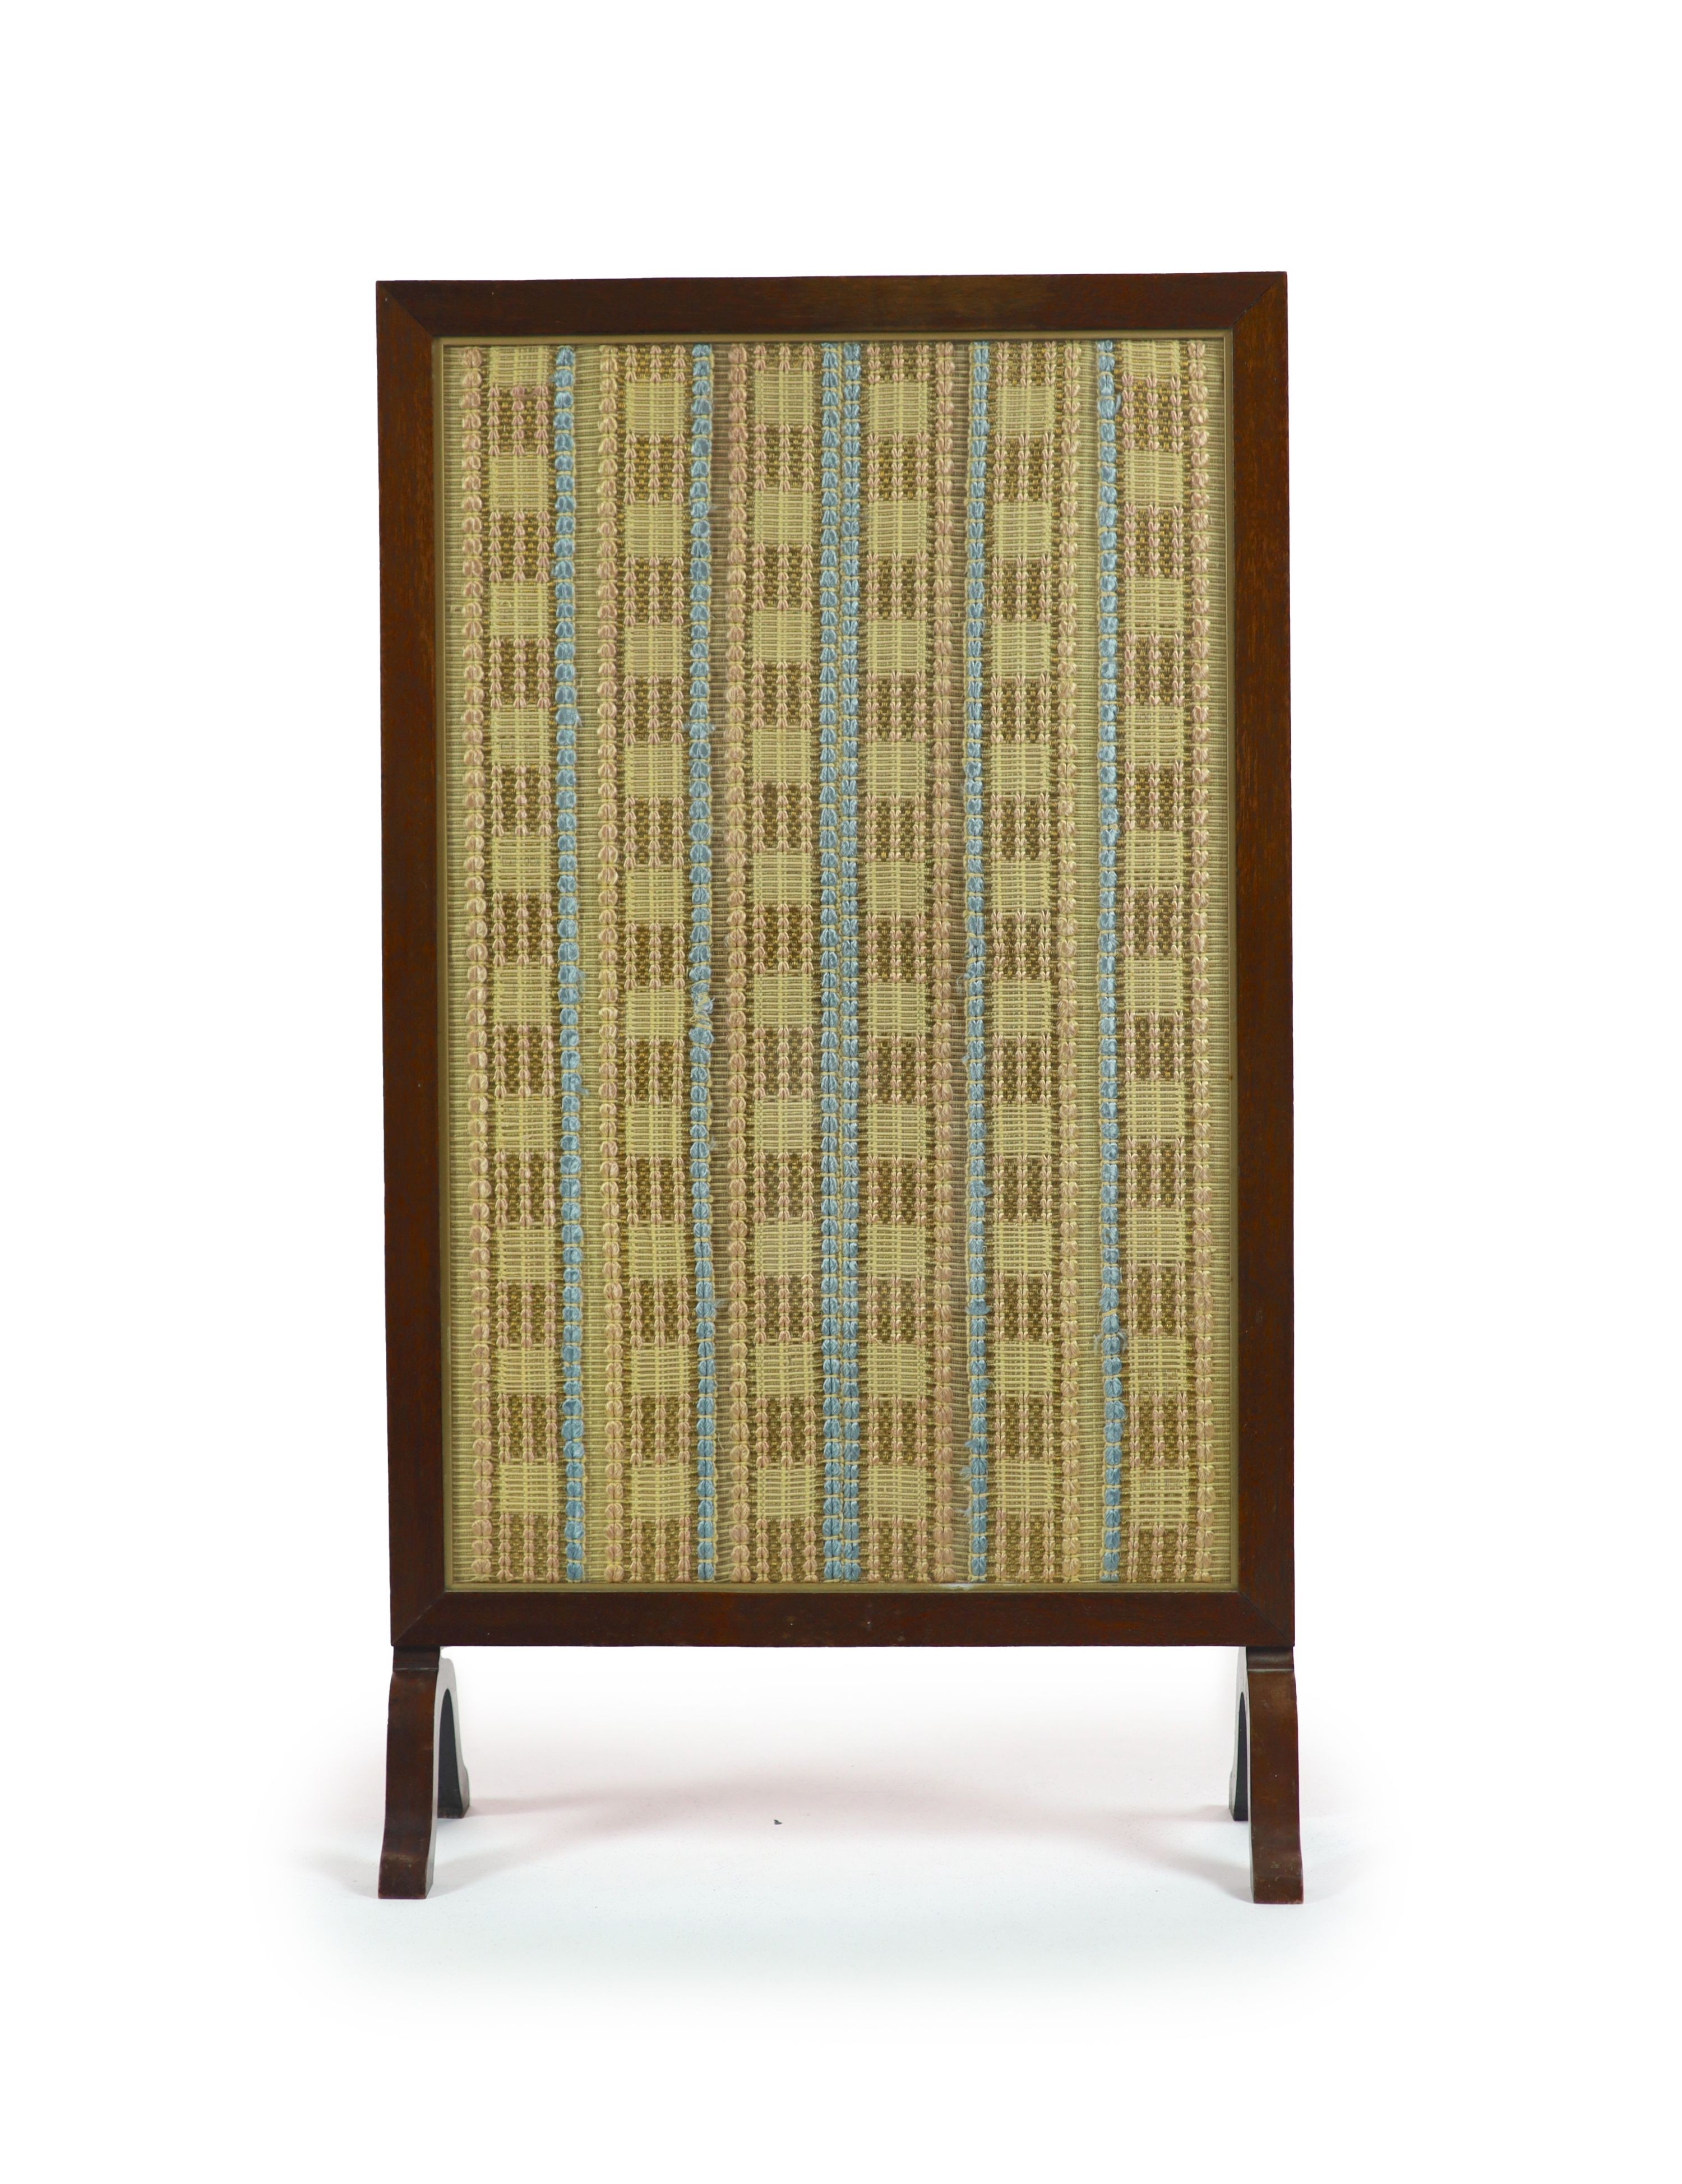 A mahogany cased and glazed embroidered fire screen of Royal interest 108 x 62cm.